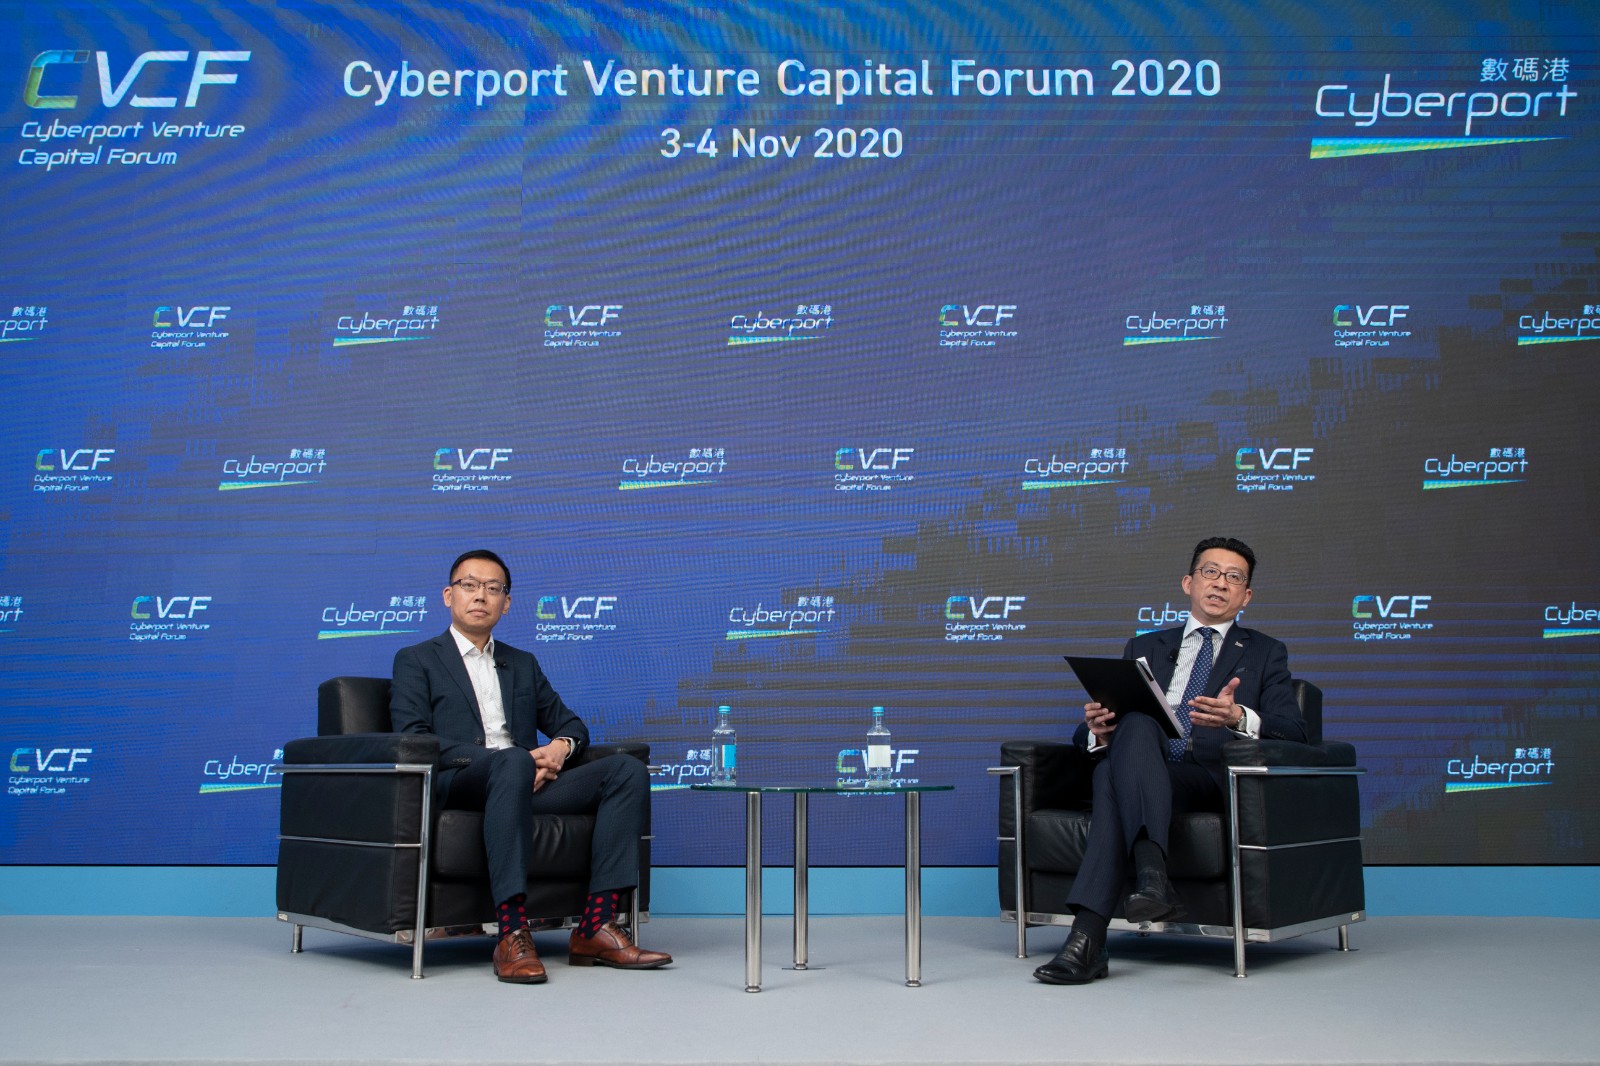 China Daily Gathers Leading Investors to Discuss the New Development of Tech Venturing in Asia